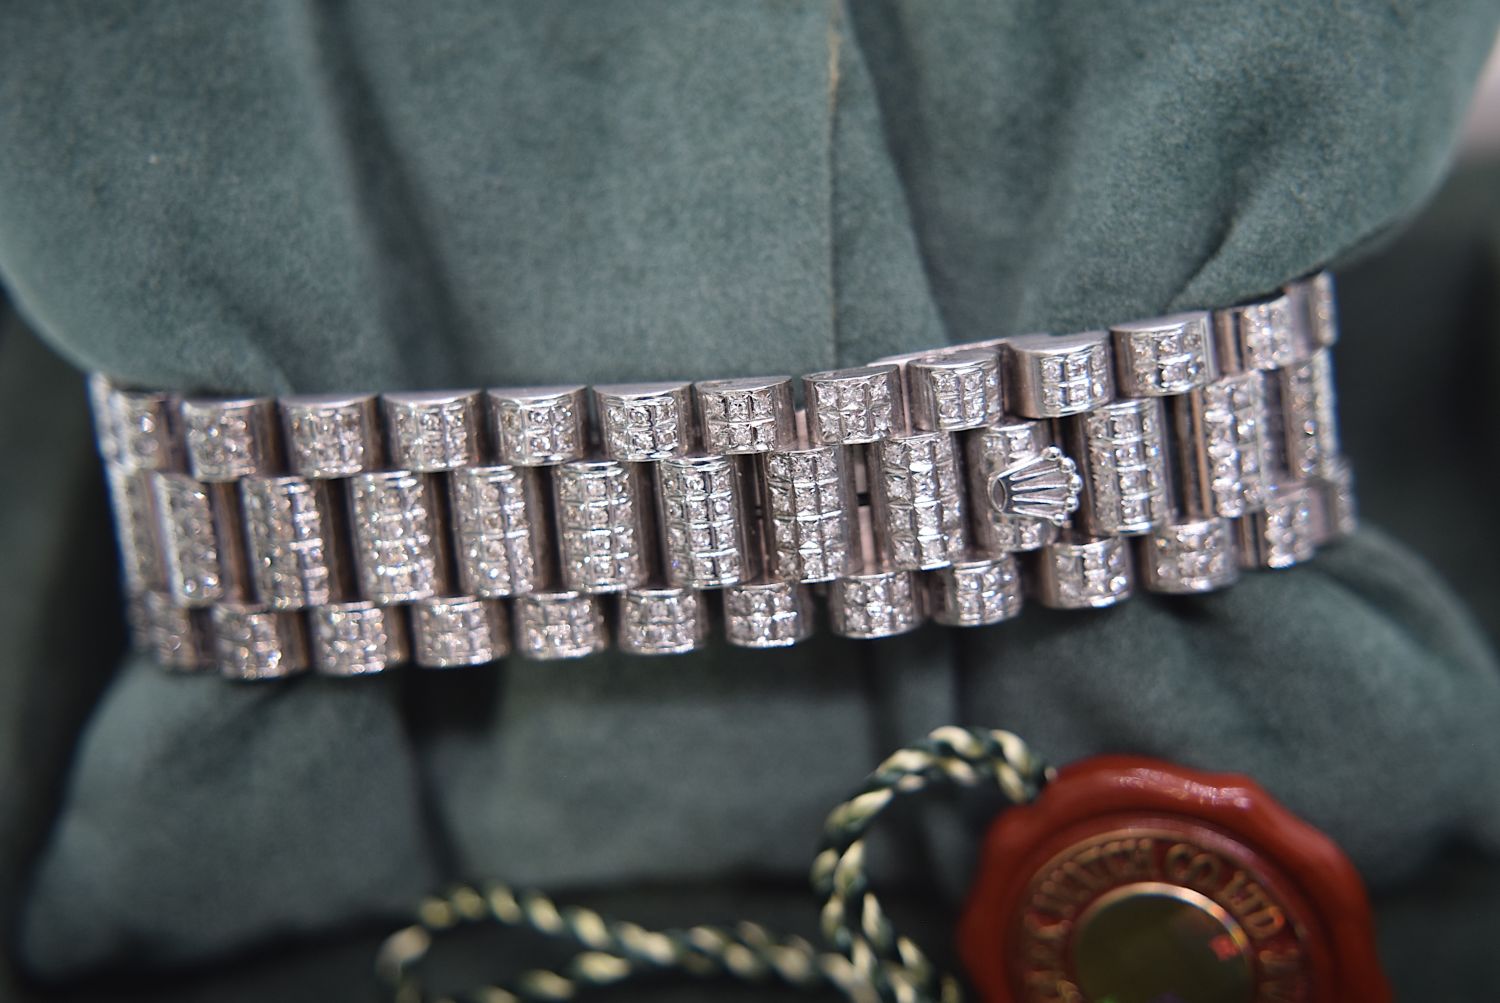 WATCH MARKED ROLEX DAY DATE (DIAMOND ENCRUSTED) MO - Image 10 of 13